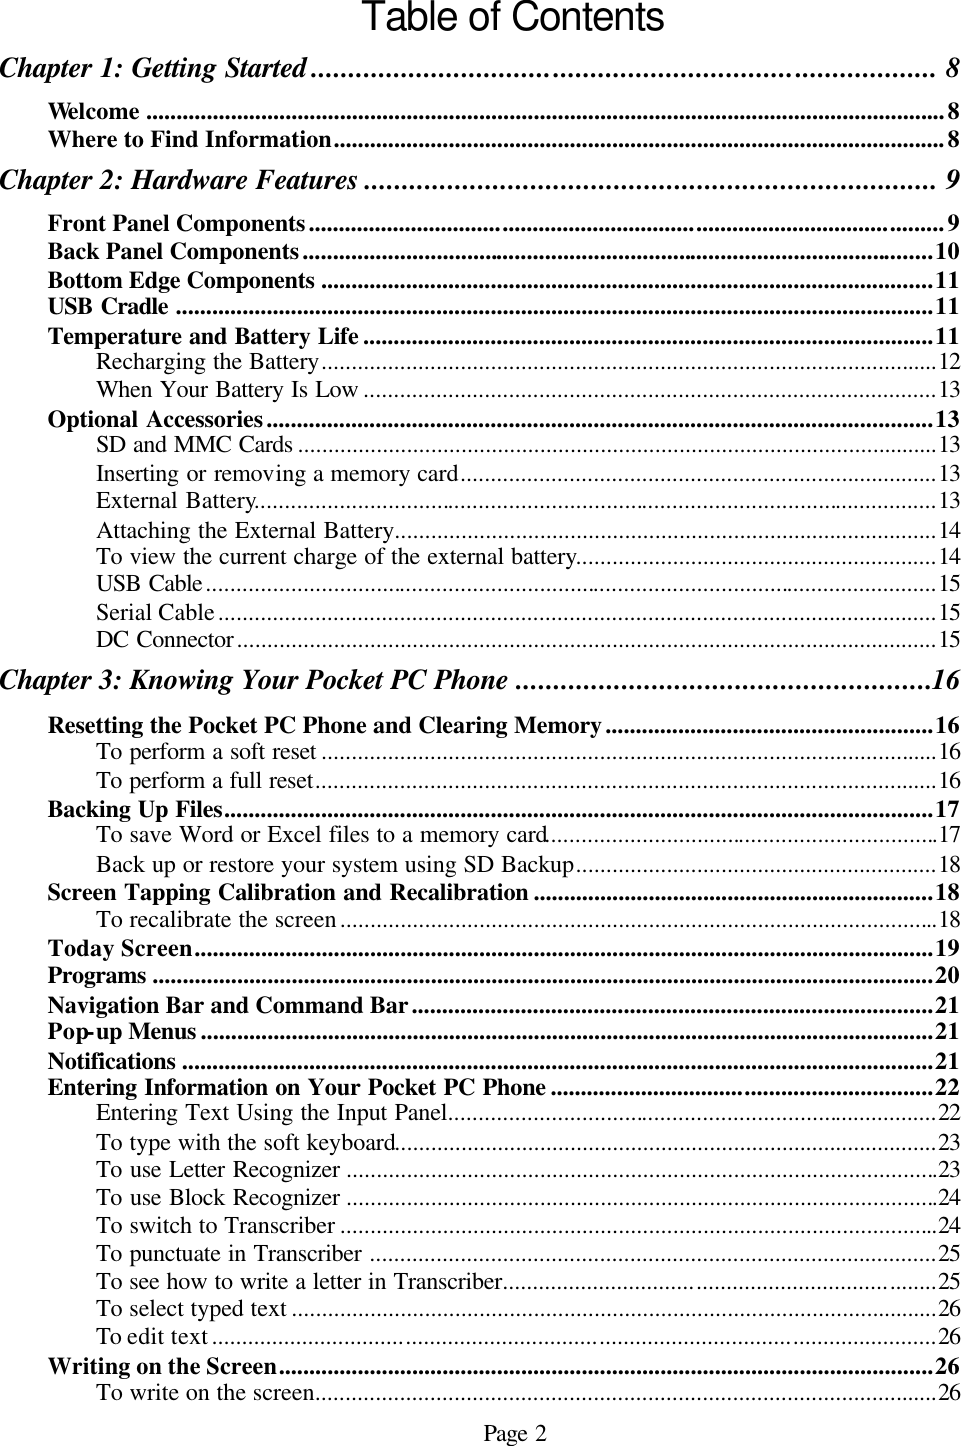 Page 2 Table of Contents Chapter 1: Getting Started ................................................................................... 8 Welcome ....................................................................................................................................8 Where to Find Information.....................................................................................................8 Chapter 2: Hardware Features ............................................................................ 9 Front Panel Components.........................................................................................................9 Back Panel Components........................................................................................................10 Bottom Edge Components .....................................................................................................11 USB Cradle .............................................................................................................................11 Temperature and Battery Life ..............................................................................................11 Recharging the Battery......................................................................................................12 When Your Battery Is Low ...............................................................................................13 Optional Accessories..............................................................................................................13 SD and MMC Cards ..........................................................................................................13 Inserting or removing a memory card...............................................................................13 External Battery.................................................................................................................13 Attaching the External Battery..........................................................................................14 To view the current charge of the external battery............................................................14 USB Cable.........................................................................................................................15 Serial Cable.......................................................................................................................15 DC Connector....................................................................................................................15 Chapter 3: Knowing Your Pocket PC Phone .......................................................16 Resetting the Pocket PC Phone and Clearing Memory......................................................16 To perform a soft reset ......................................................................................................16 To perform a full reset.......................................................................................................16 Backing Up Files.....................................................................................................................17 To save Word or Excel files to a memory card.................................................................17 Back up or restore your system using SD Backup............................................................18 Screen Tapping Calibration and Recalibration ..................................................................18 To recalibrate the screen...................................................................................................18 Today Screen..........................................................................................................................19 Programs .................................................................................................................................20 Navigation Bar and Command Bar......................................................................................21 Pop-up Menus .........................................................................................................................21 Notifications ............................................................................................................................21 Entering Information on Your Pocket PC Phone ...............................................................22 Entering Text Using the Input Panel.................................................................................22 To type with the soft keyboard..........................................................................................23 To use Letter Recognizer ..................................................................................................23 To use Block Recognizer ..................................................................................................24 To switch to Transcriber ...................................................................................................24 To punctuate in Transcriber ..............................................................................................25 To see how to write a letter in Transcriber........................................................................25 To select typed text ...........................................................................................................26 To edit text........................................................................................................................26 Writing on the Screen............................................................................................................26 To write on the screen.......................................................................................................26 